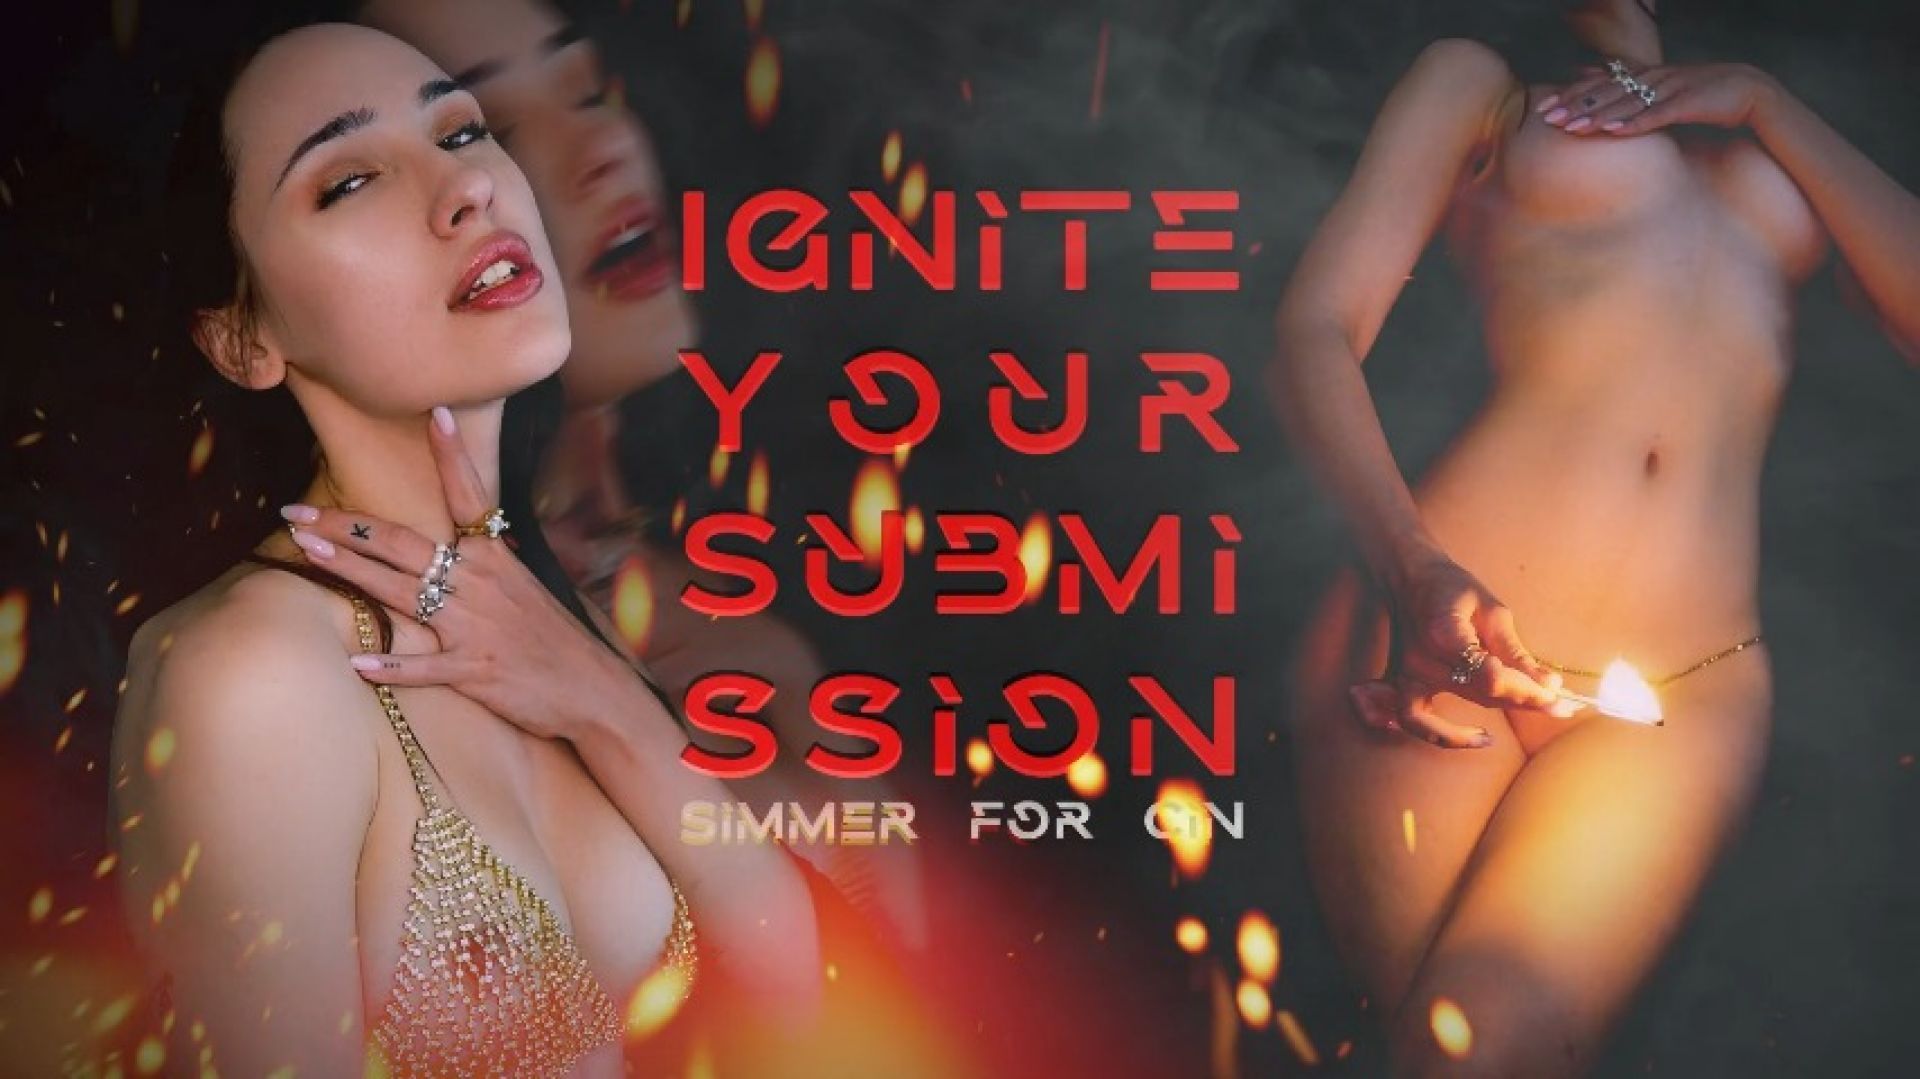 Ignite Your Submission, Simmer for Cin